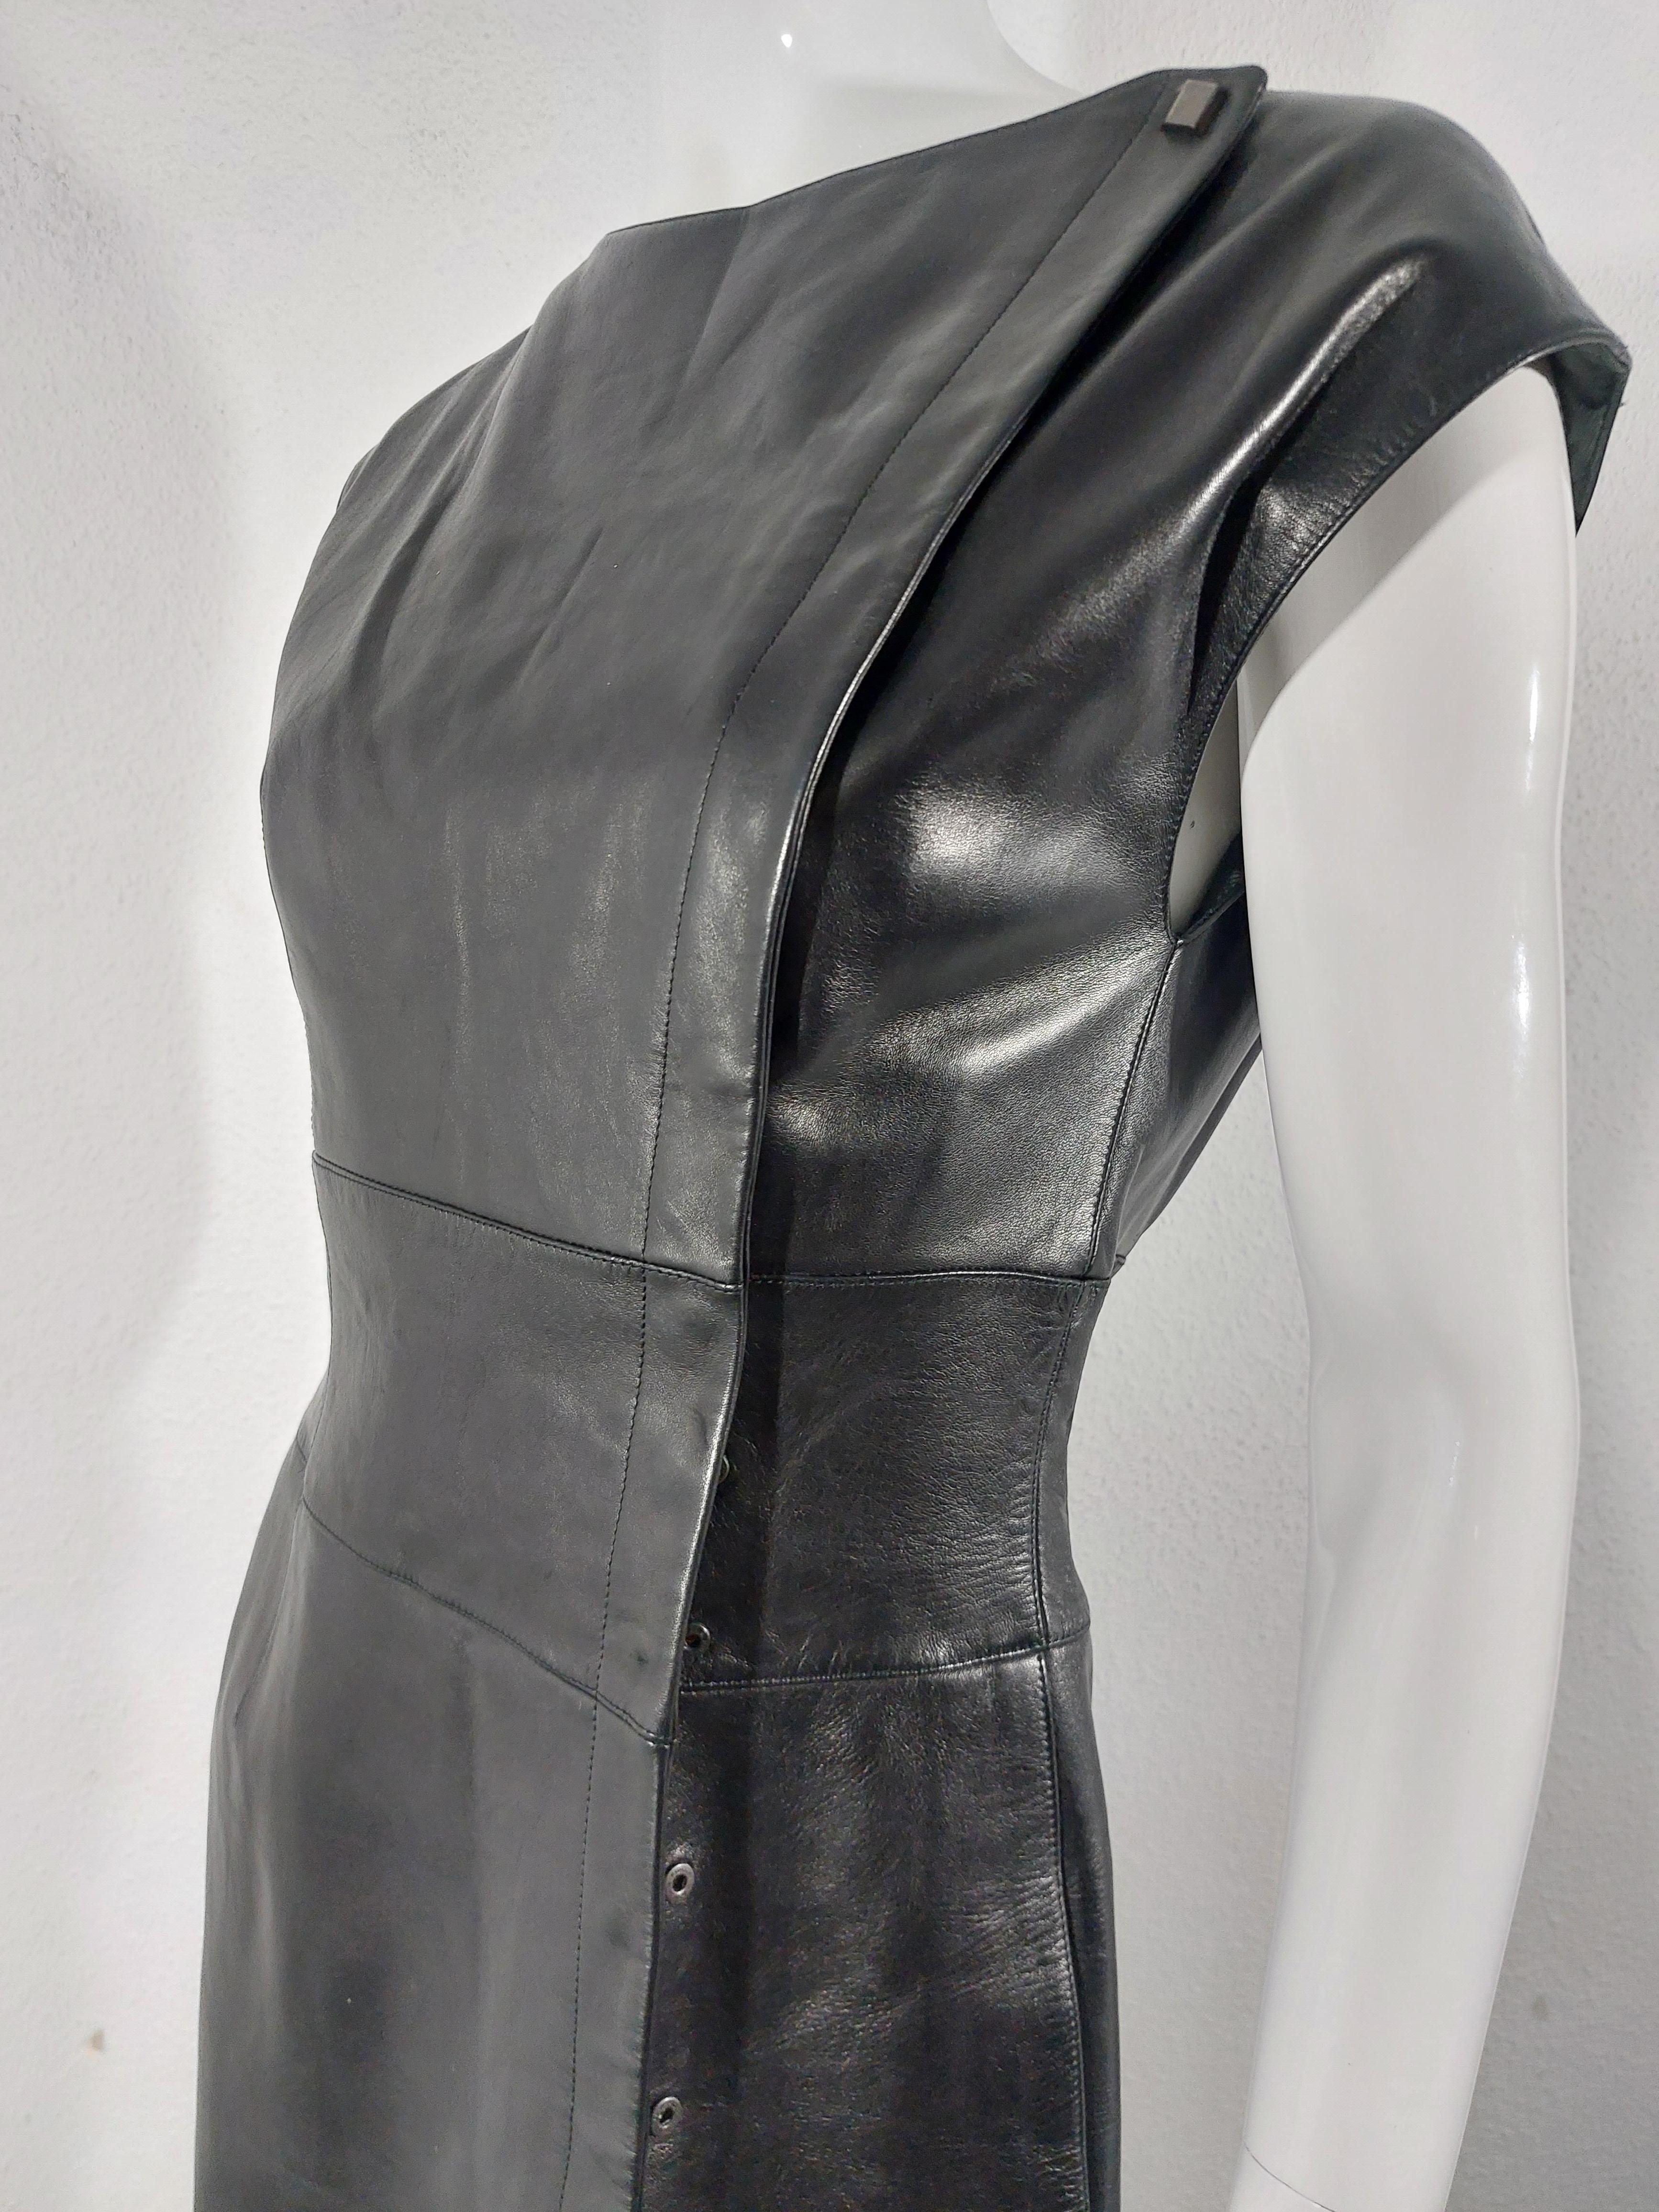 Thierry Mugler Couture Lambskin Leather Snap Evening Wrap Split Sculptural Dress For Sale 7